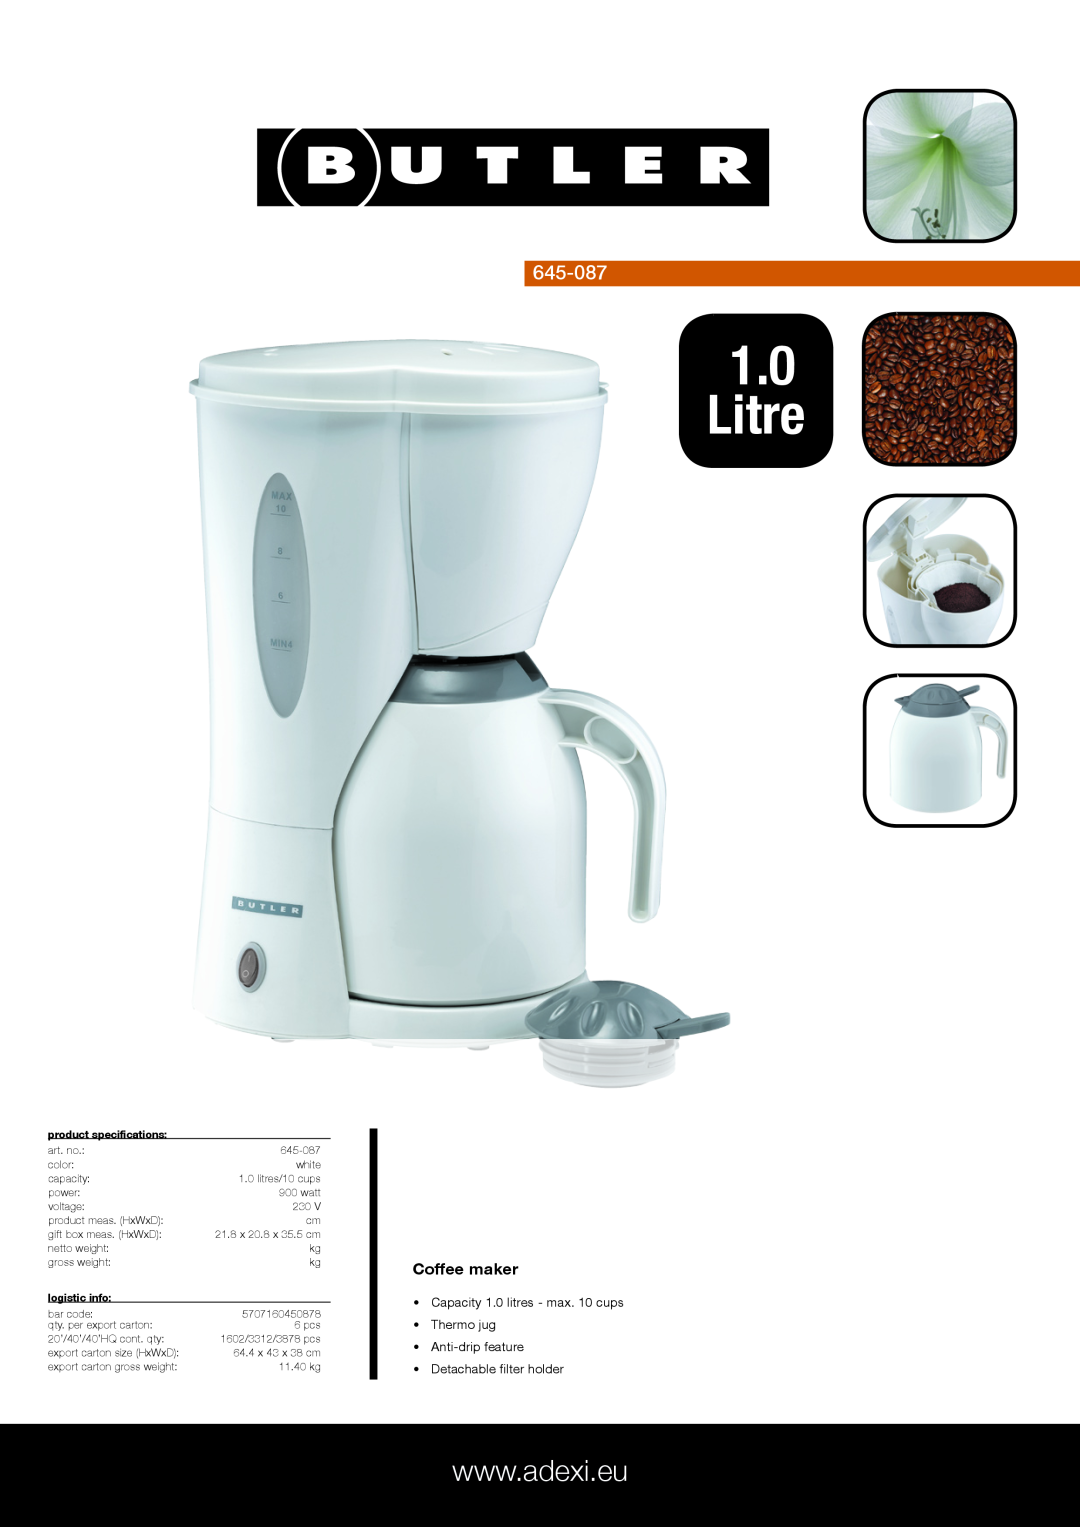 Melissa 645087 specifications Litre, 645-087, Coffee maker, Capacity 1.0 litres - max. 10 cups Thermo jug, logistic info 